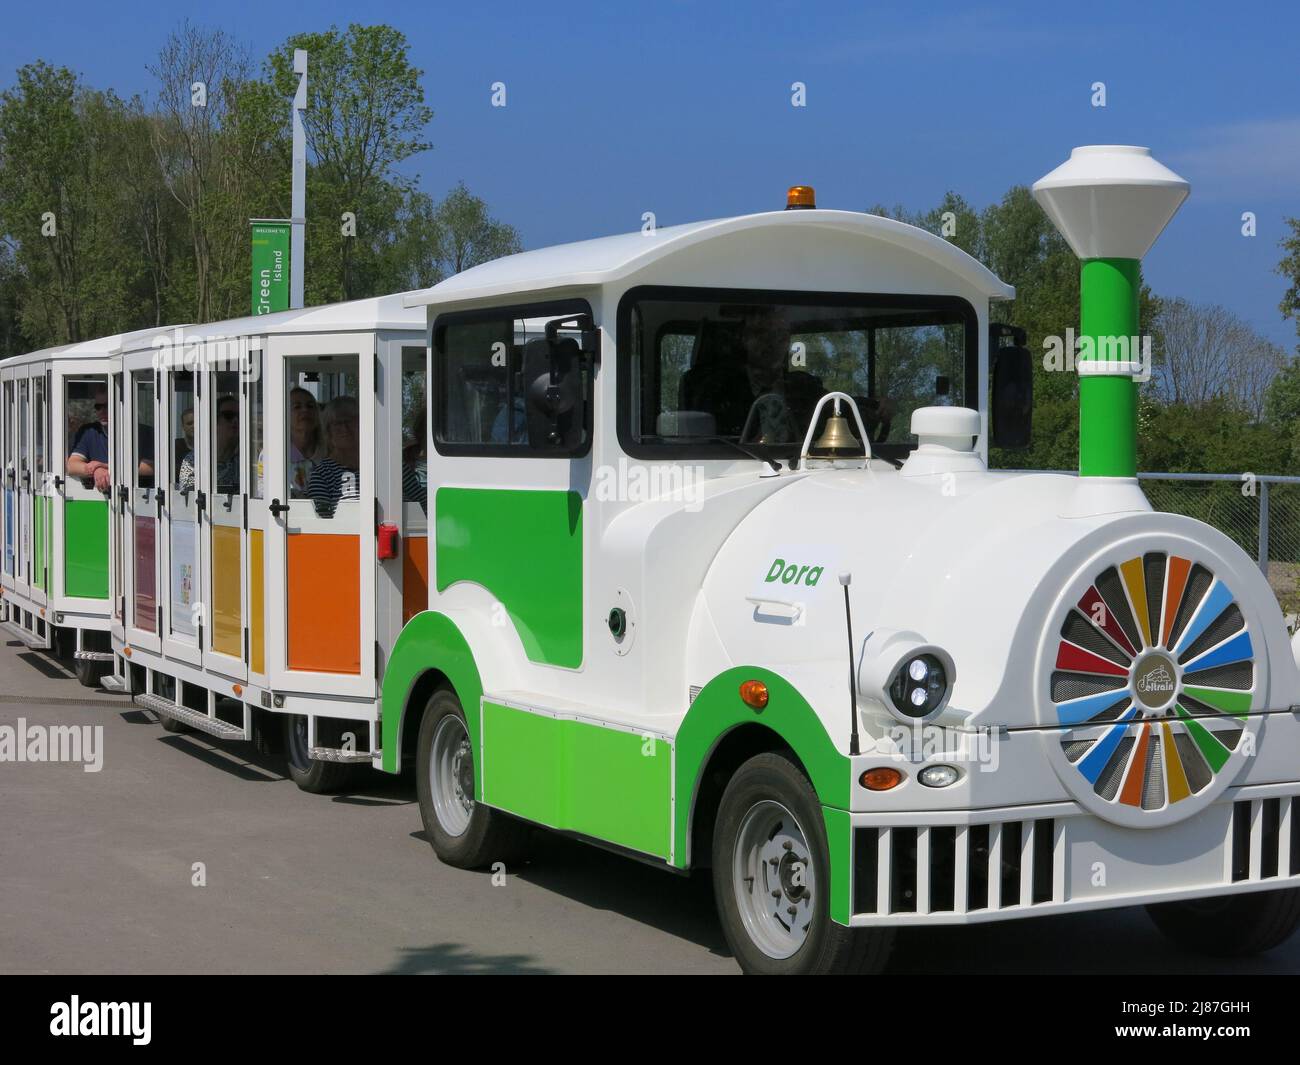 Floriade Explorer: the brightly coloured hop-on hop-off land train that transports visitors across the park of the 2022 flower festival, Almere. Stock Photo